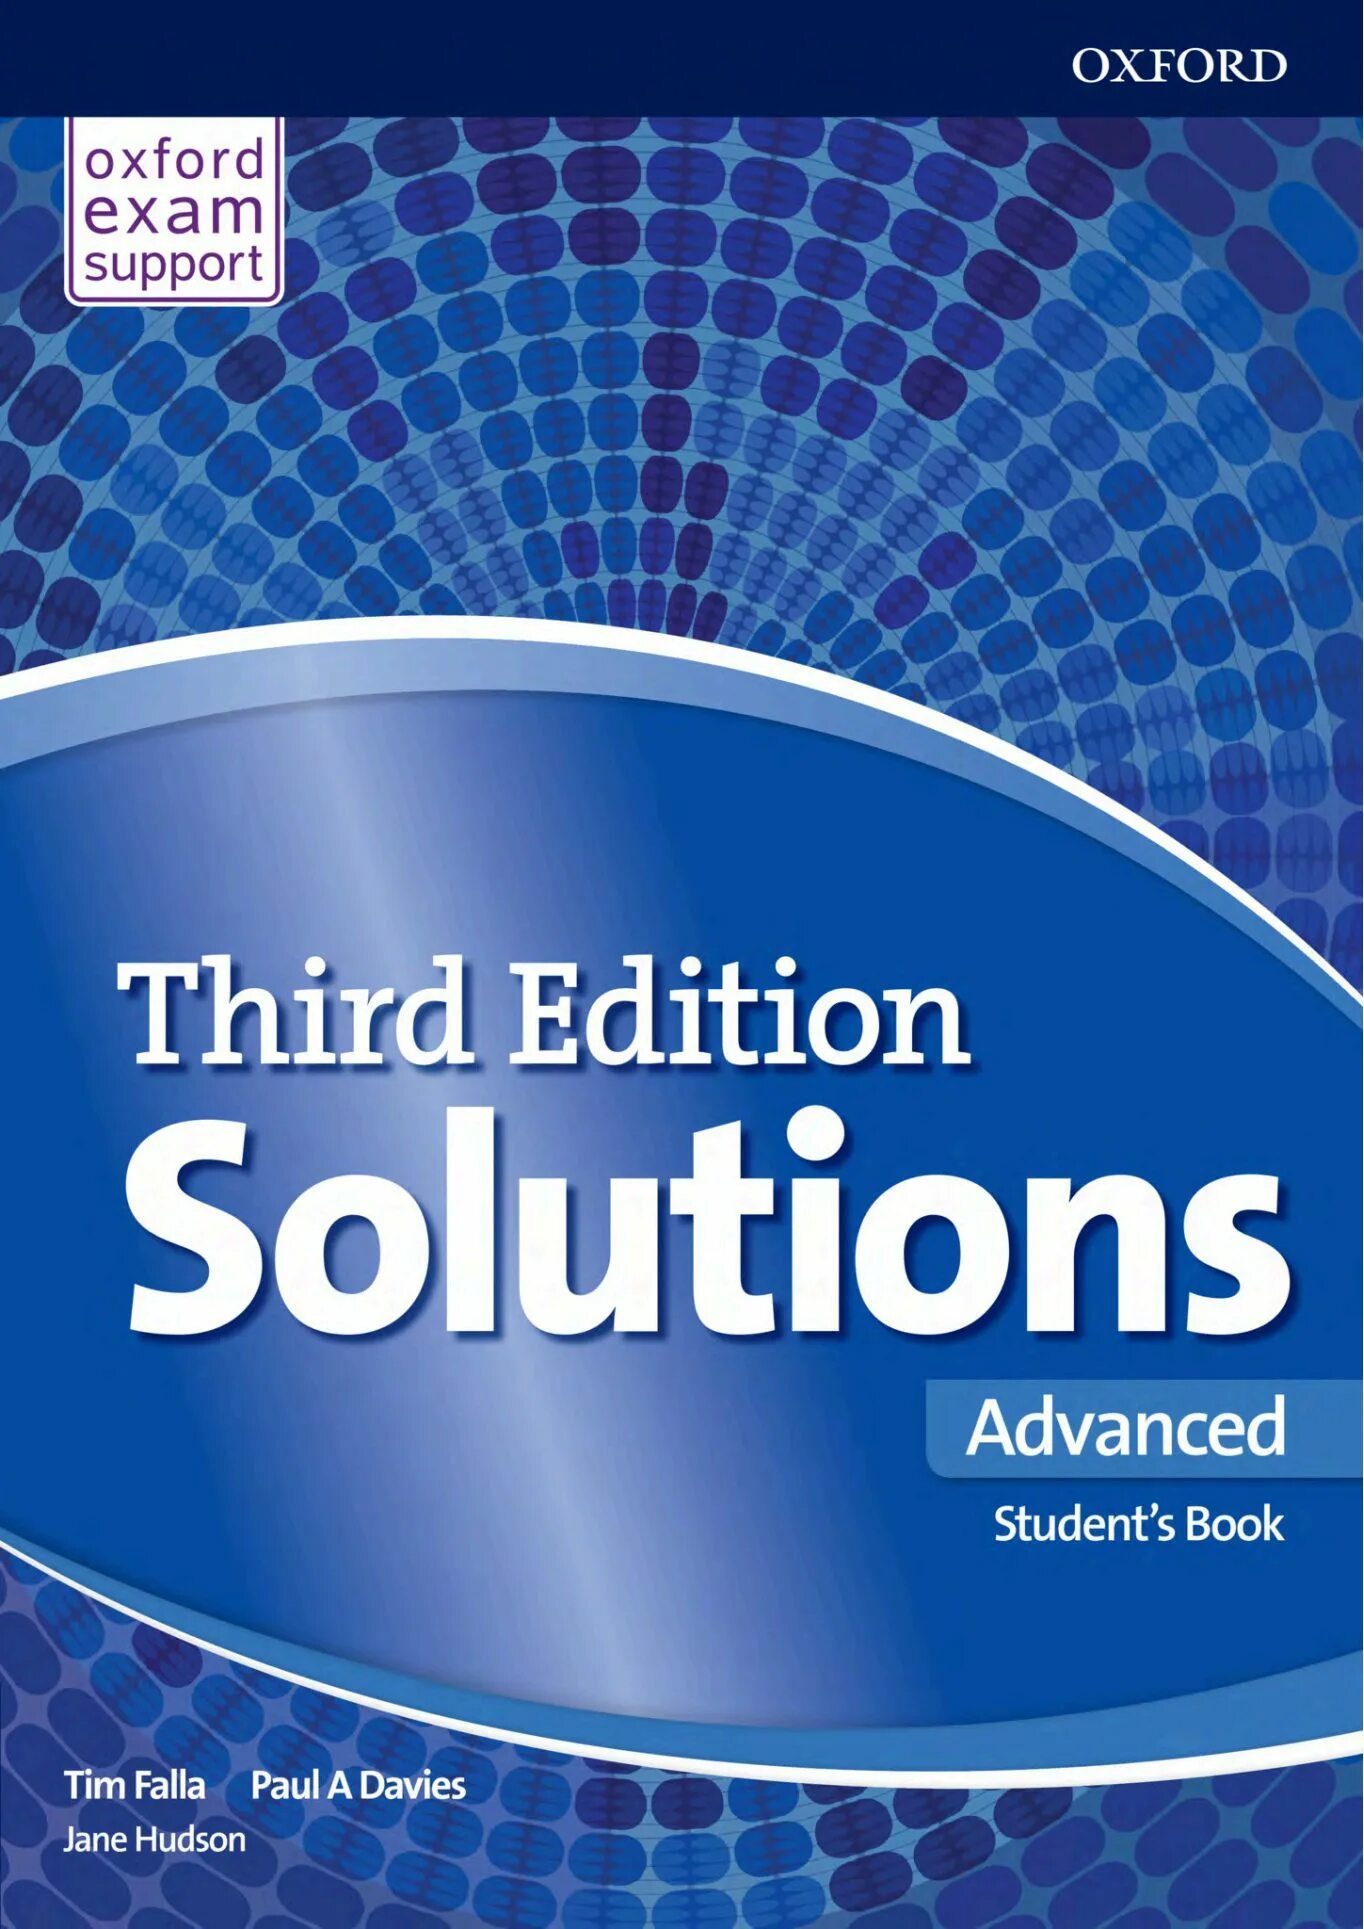 Solutions 3rd Edition rybrb. Solutions. Advanced - student's book (+Workbook) (third Edition). Учебник third Edition solutions. Solutions Advanced student's book (3 Edition). Oxford student s book